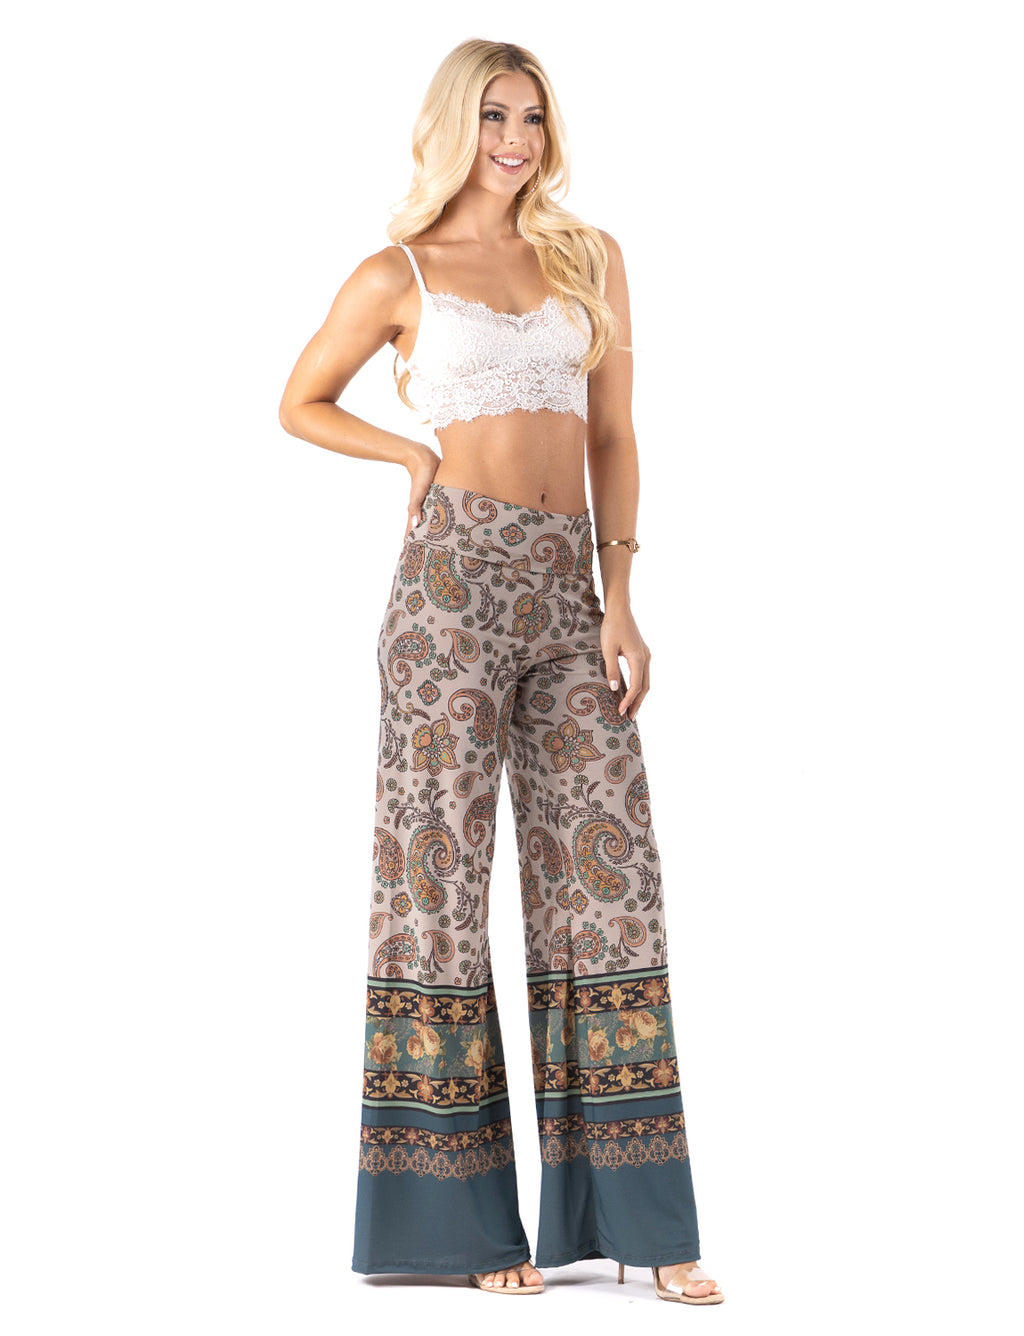 Beautiful woman wearing this amazing Tan & Floral Paisley High waist palazzo pants featuring pockets, wide legs, and a comfortable stretchy fabric Perfect for any activity,relaxing day,beautiful and unique,comfortable and flattering